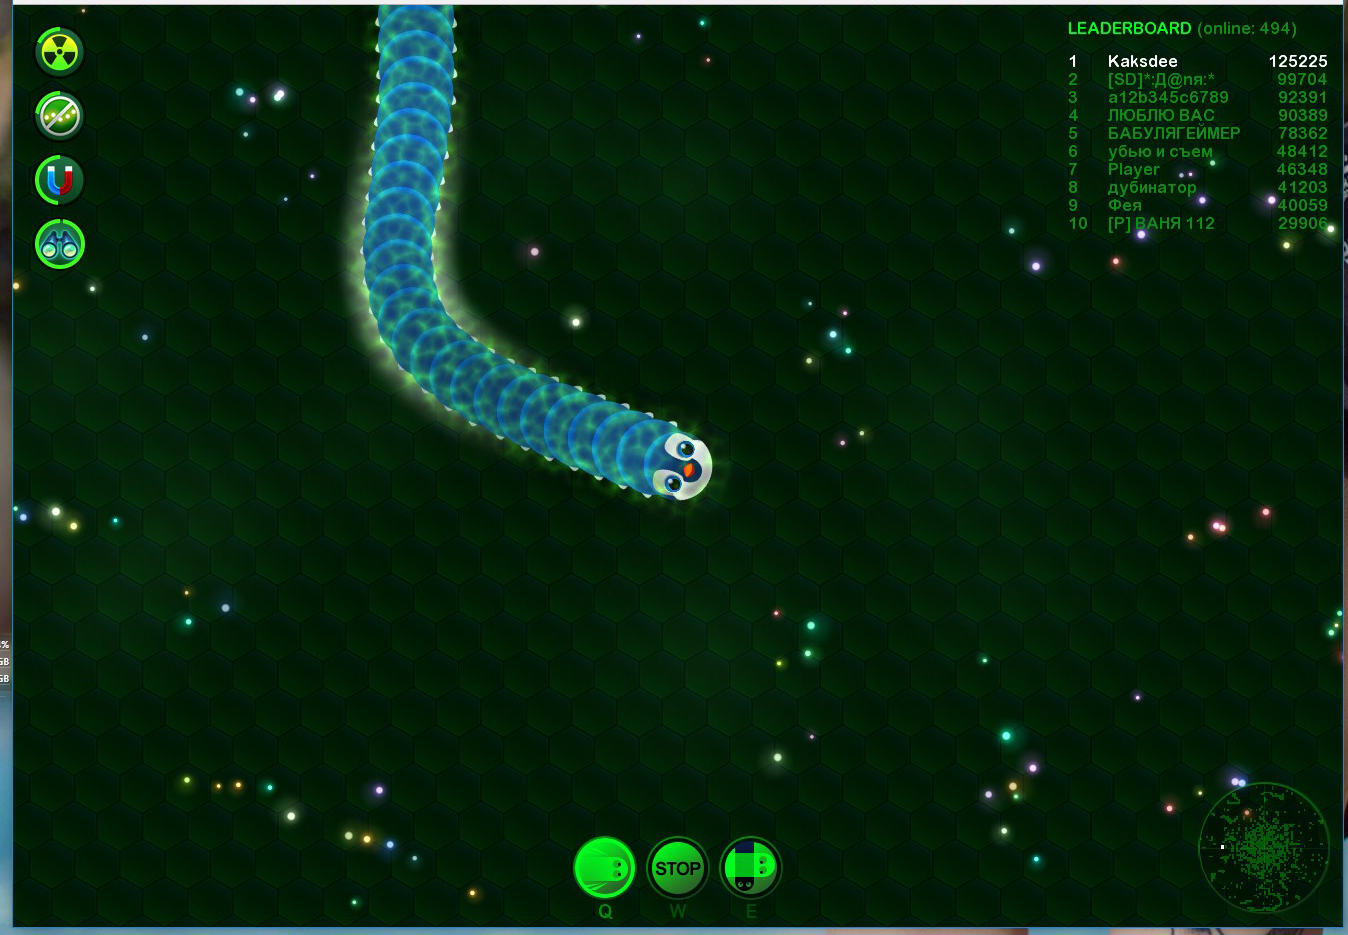 Wormax.io game on Poki is a free multiplayer online game just like Snakes